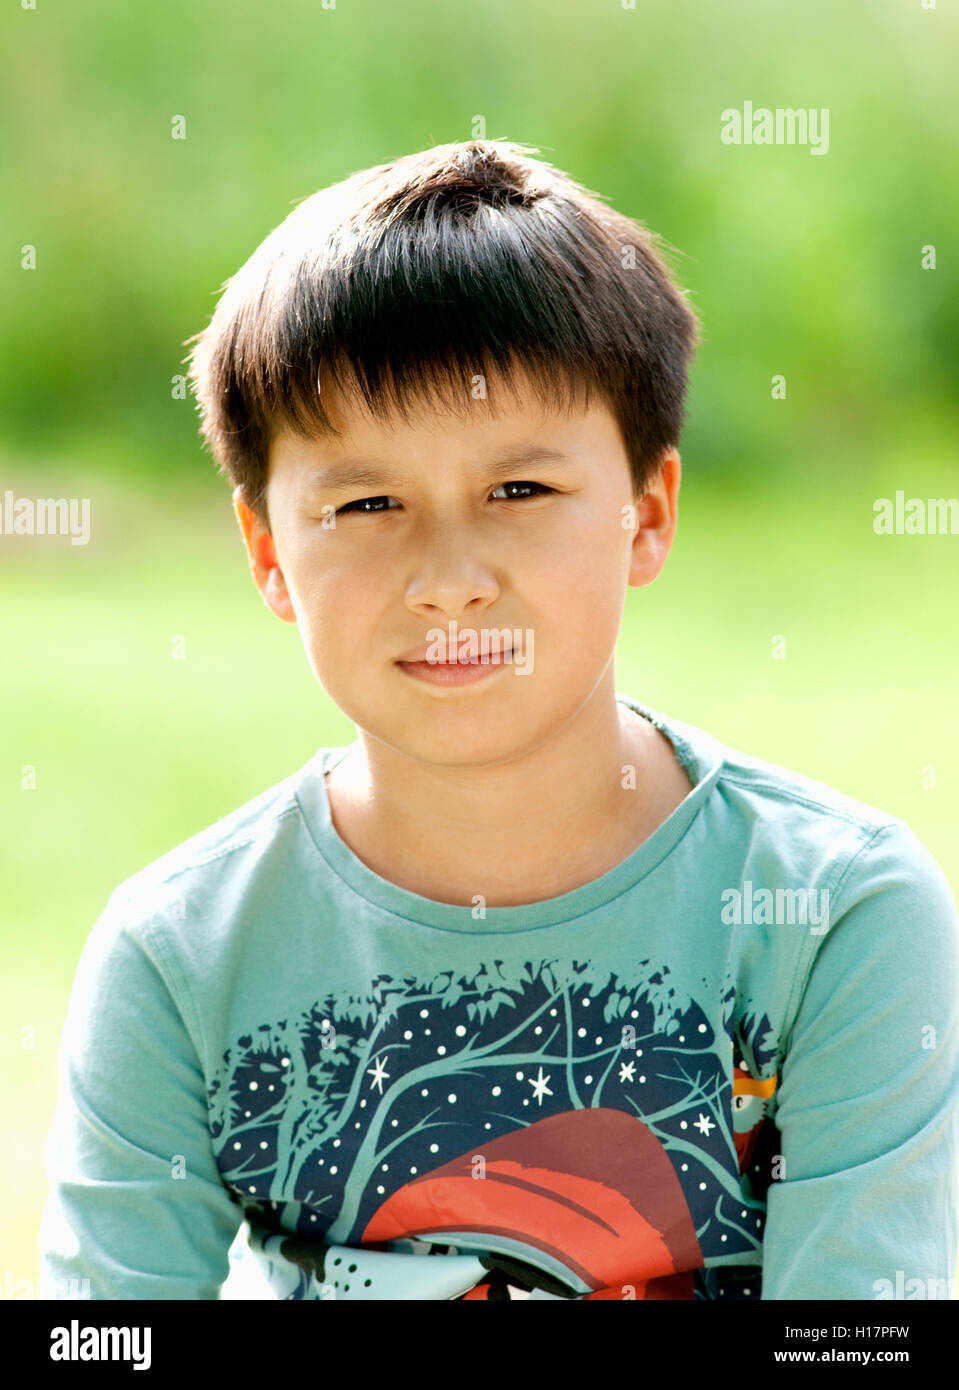 Portrait of a Boy with Dark Hair Outdoors Stock Photo